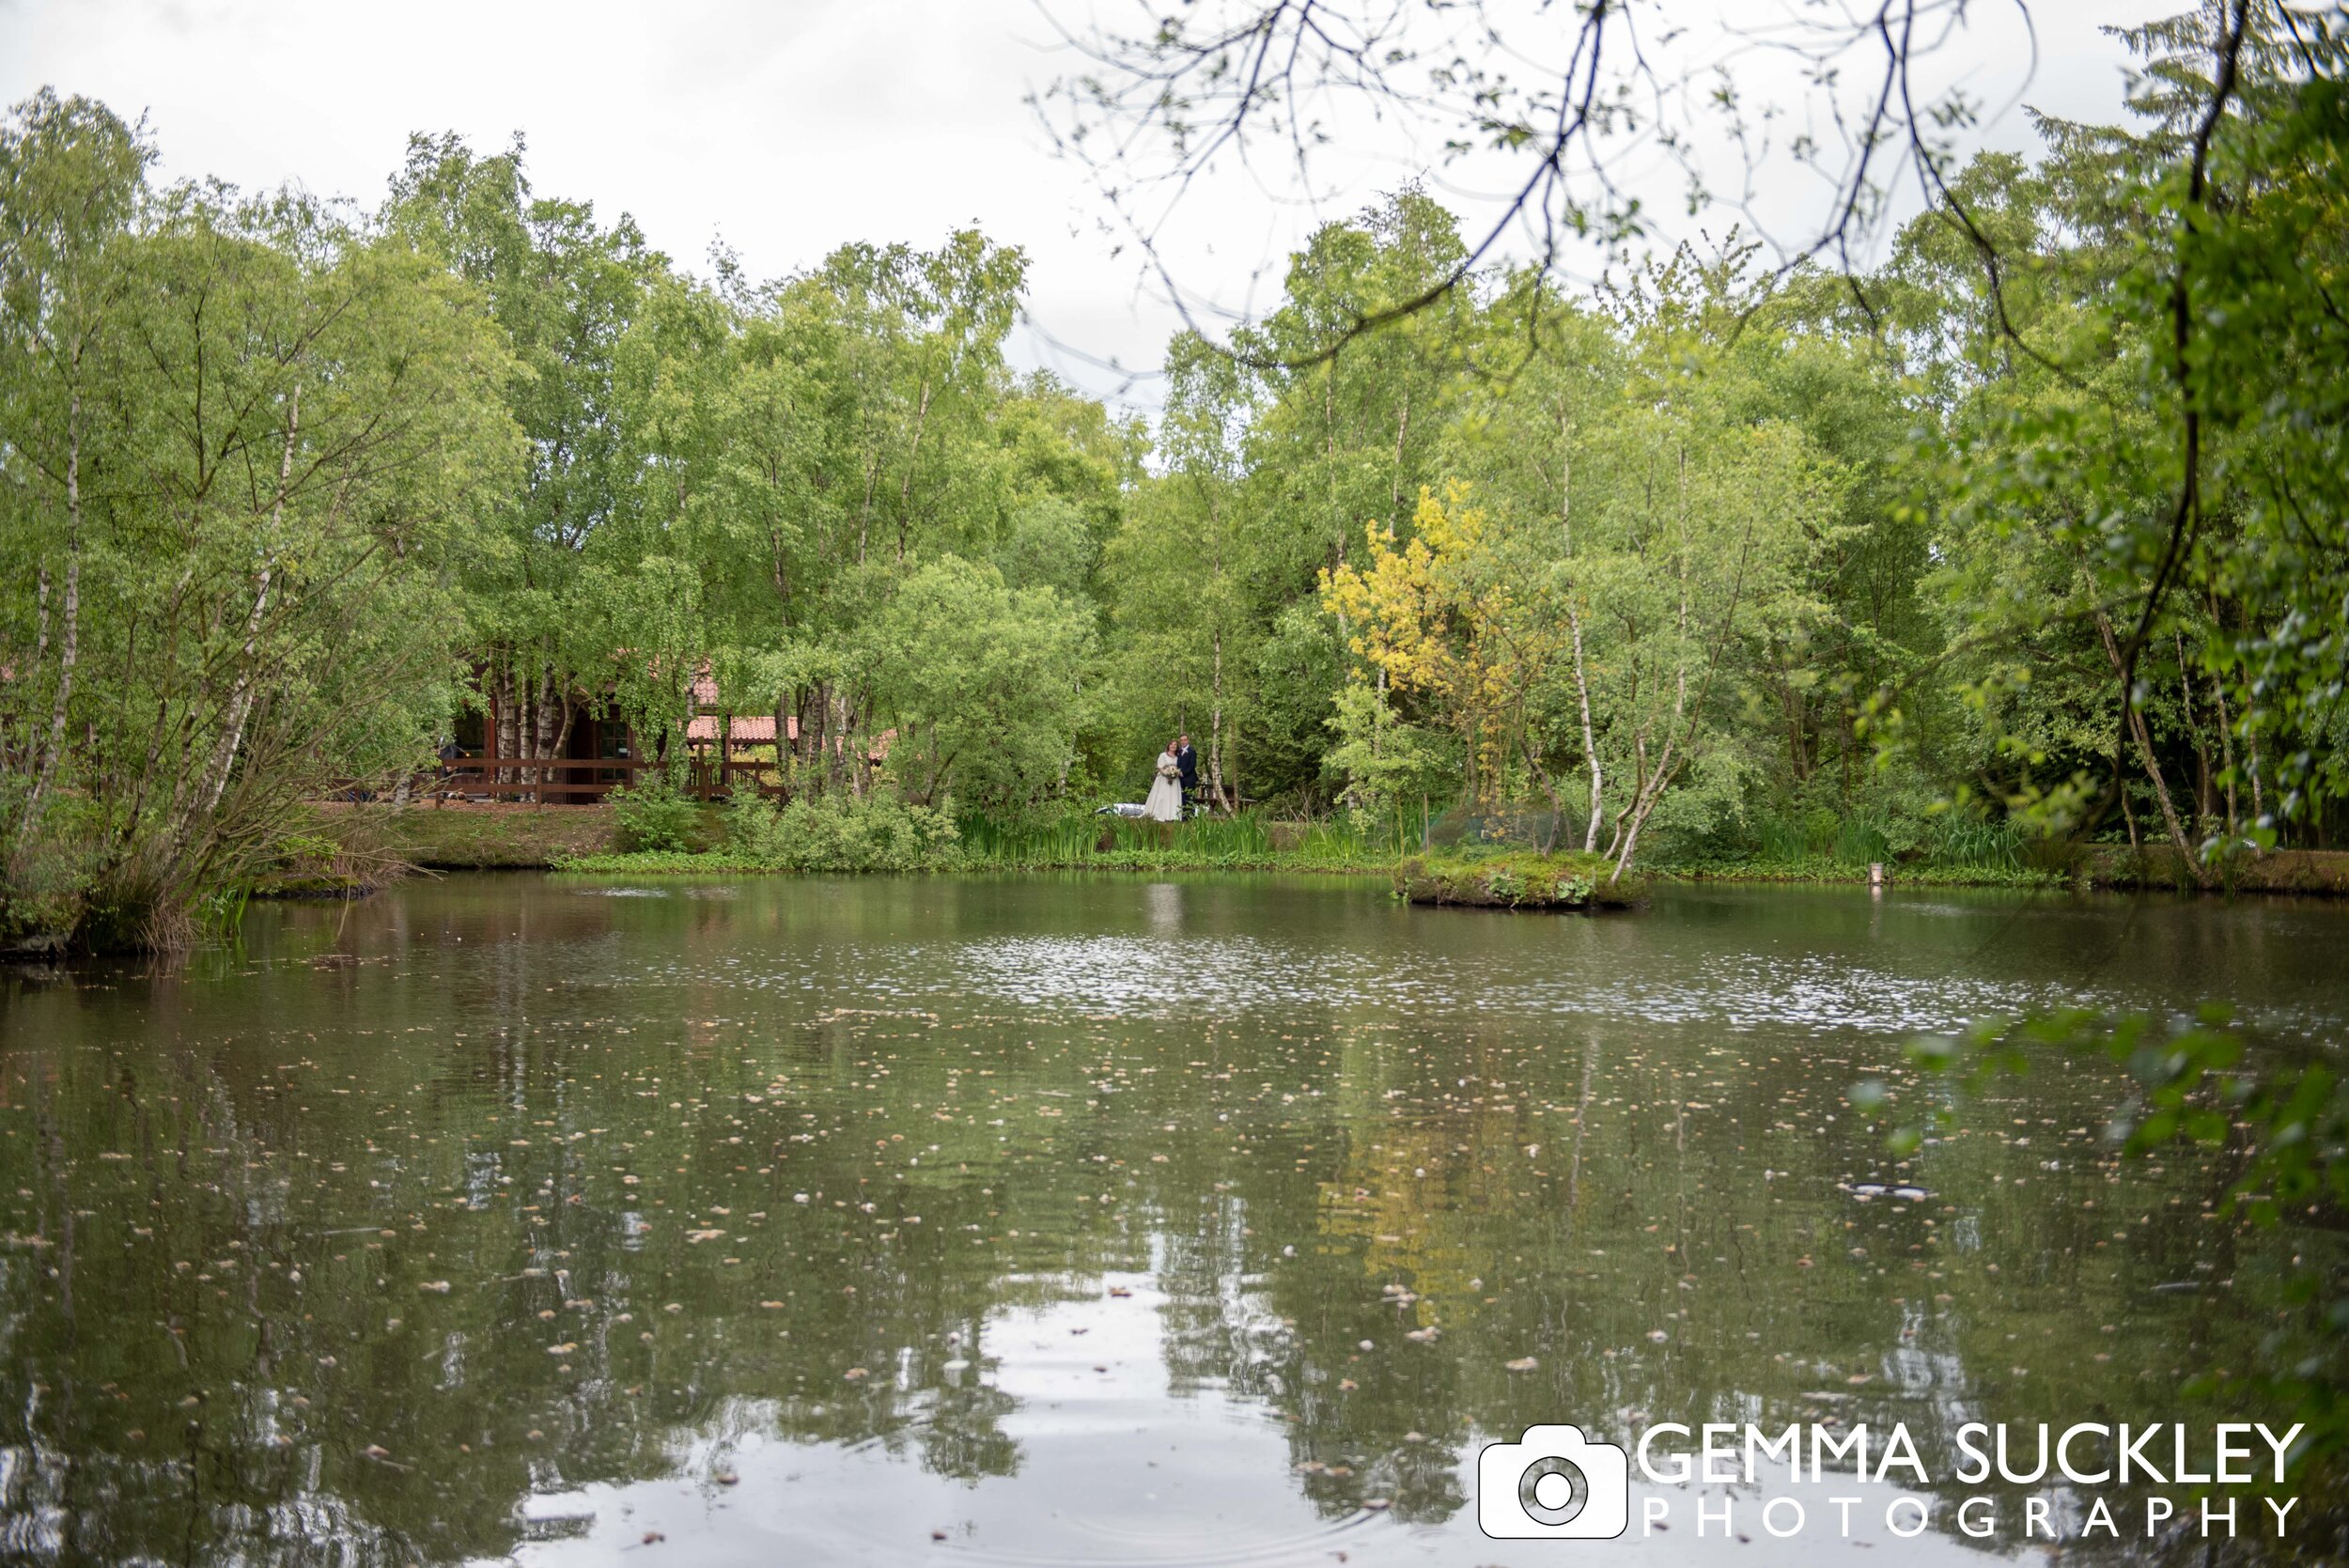 a wedding photo of the bride and groom across the lake at otely chevin country park hotel